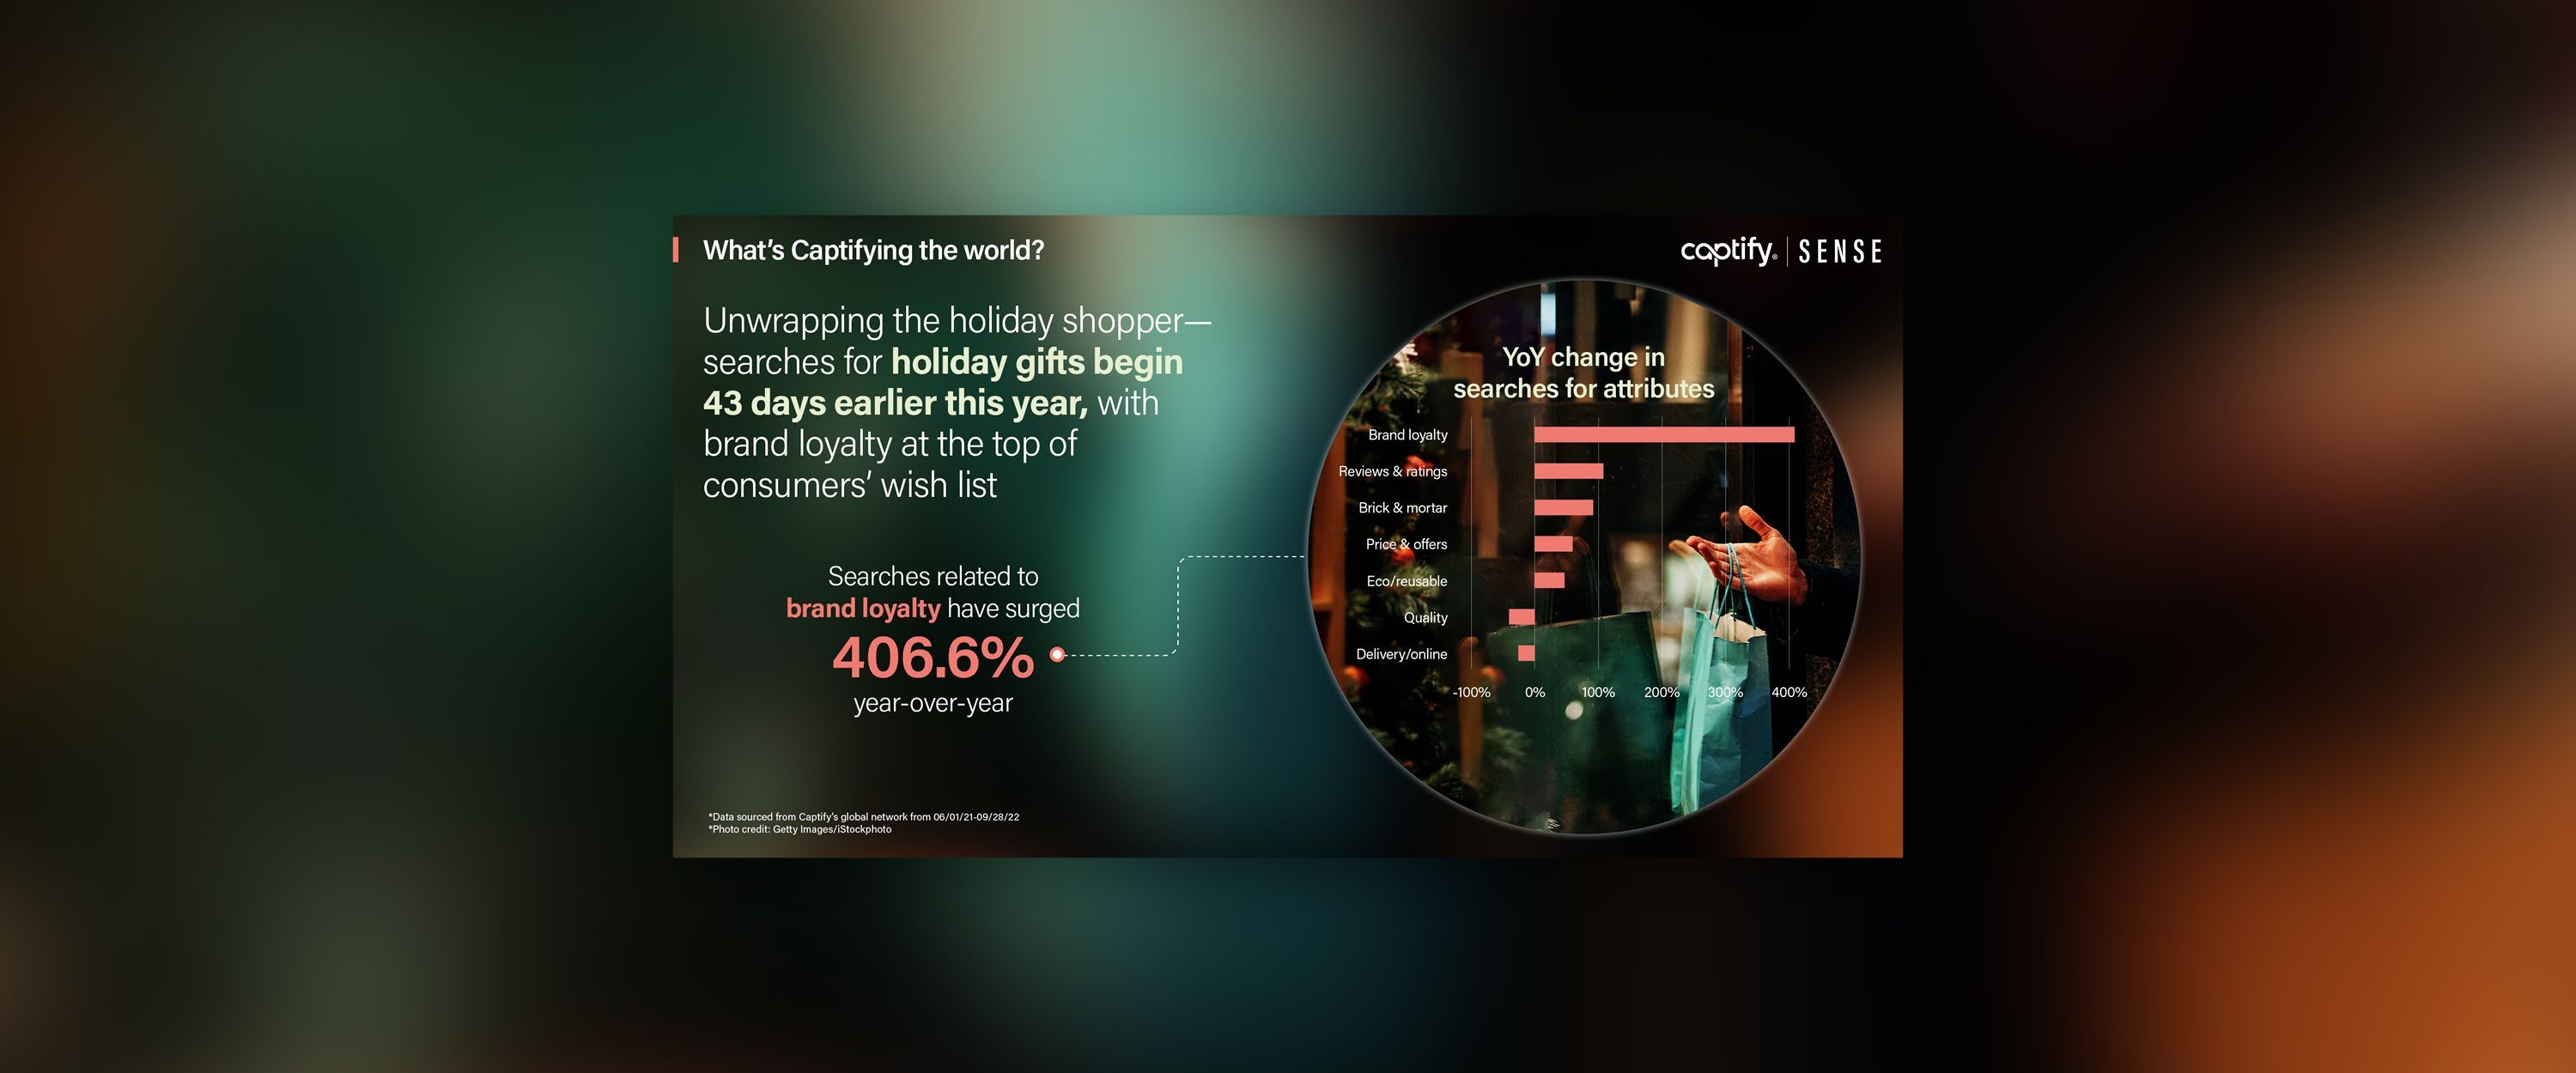 What’s Captifying The World: Unwrapping The Holiday Shopper—Searches For Holiday Gifts Begin 43 Days Earlier This Year, With Brand Loyalty At The Top Of Consumers’ Wish List